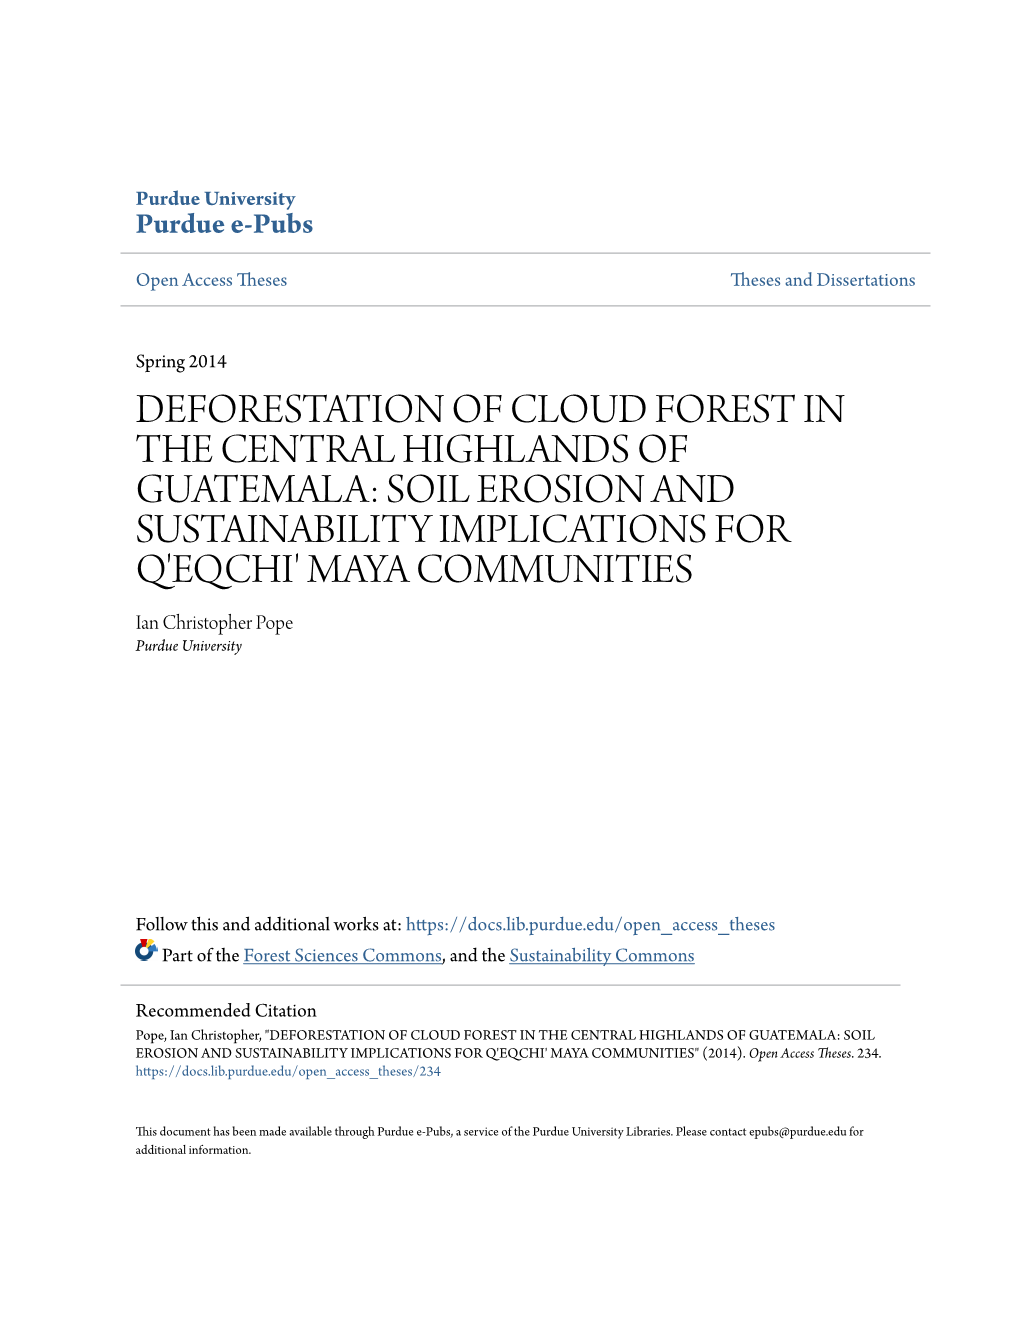 Deforestation of Cloud Forest in the Central Highlands of Guatemala: Soil Erosion and Sustainability Implications for Q'eqch